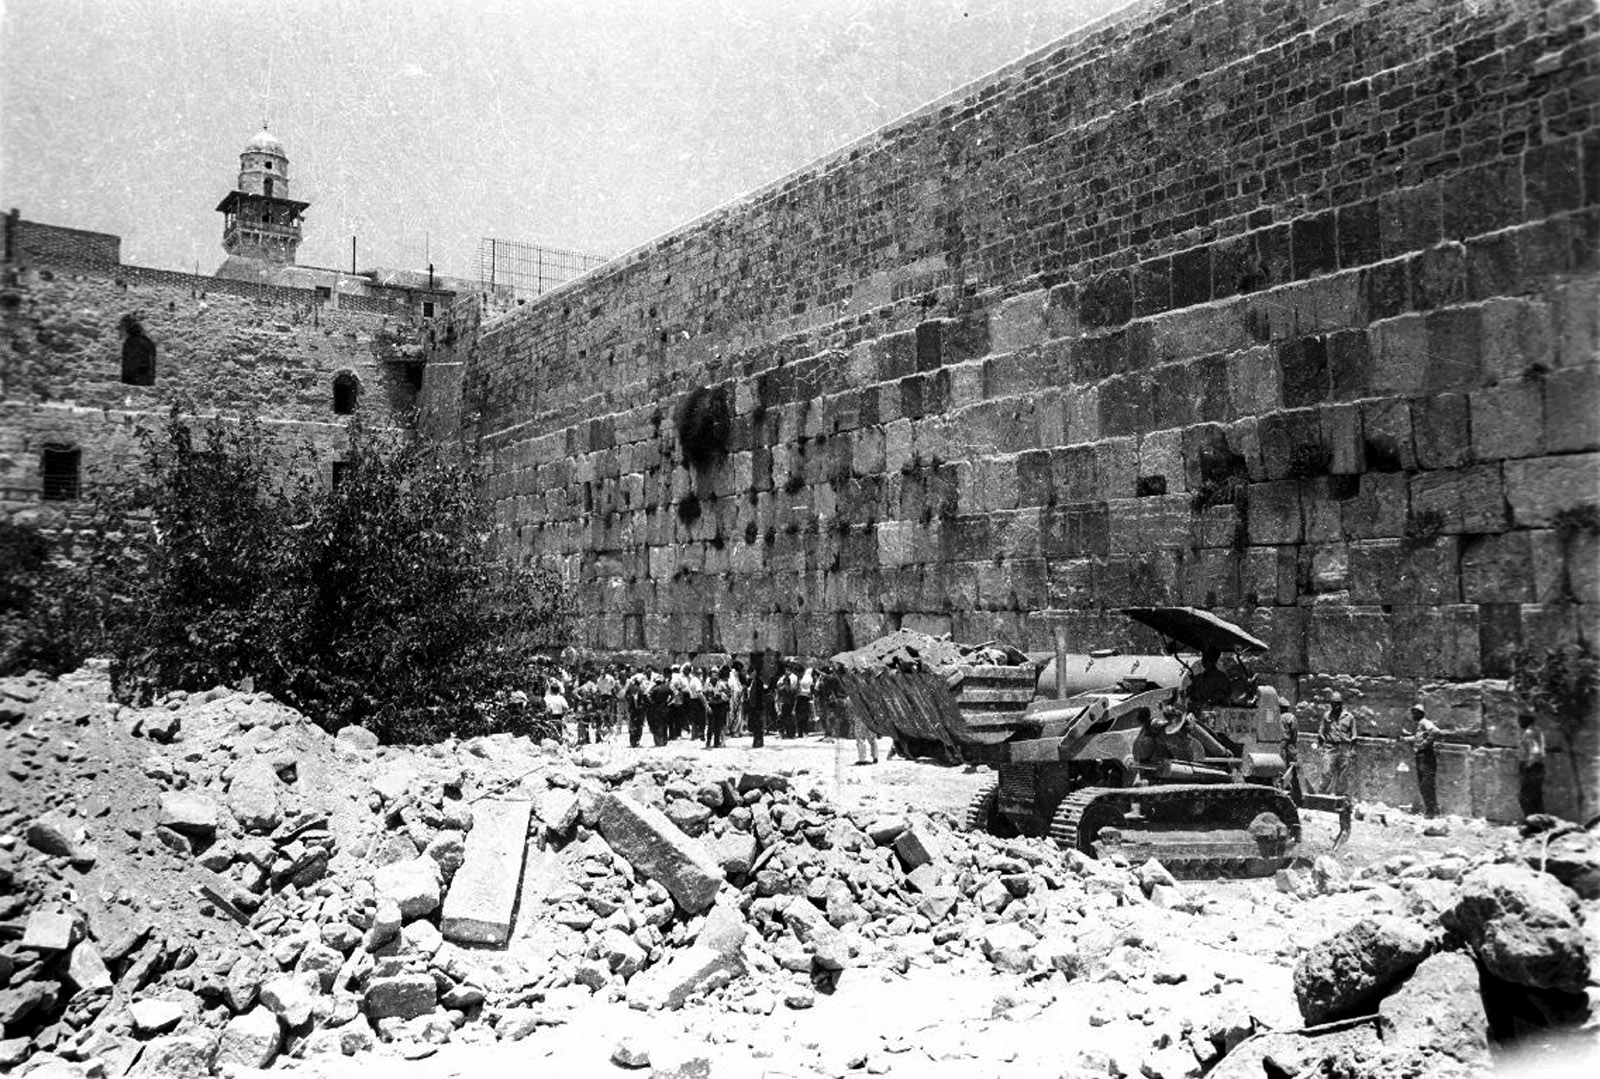 in a matter of hours after the capture of the Old City by Israeli forces in the Six-Day War of 1967